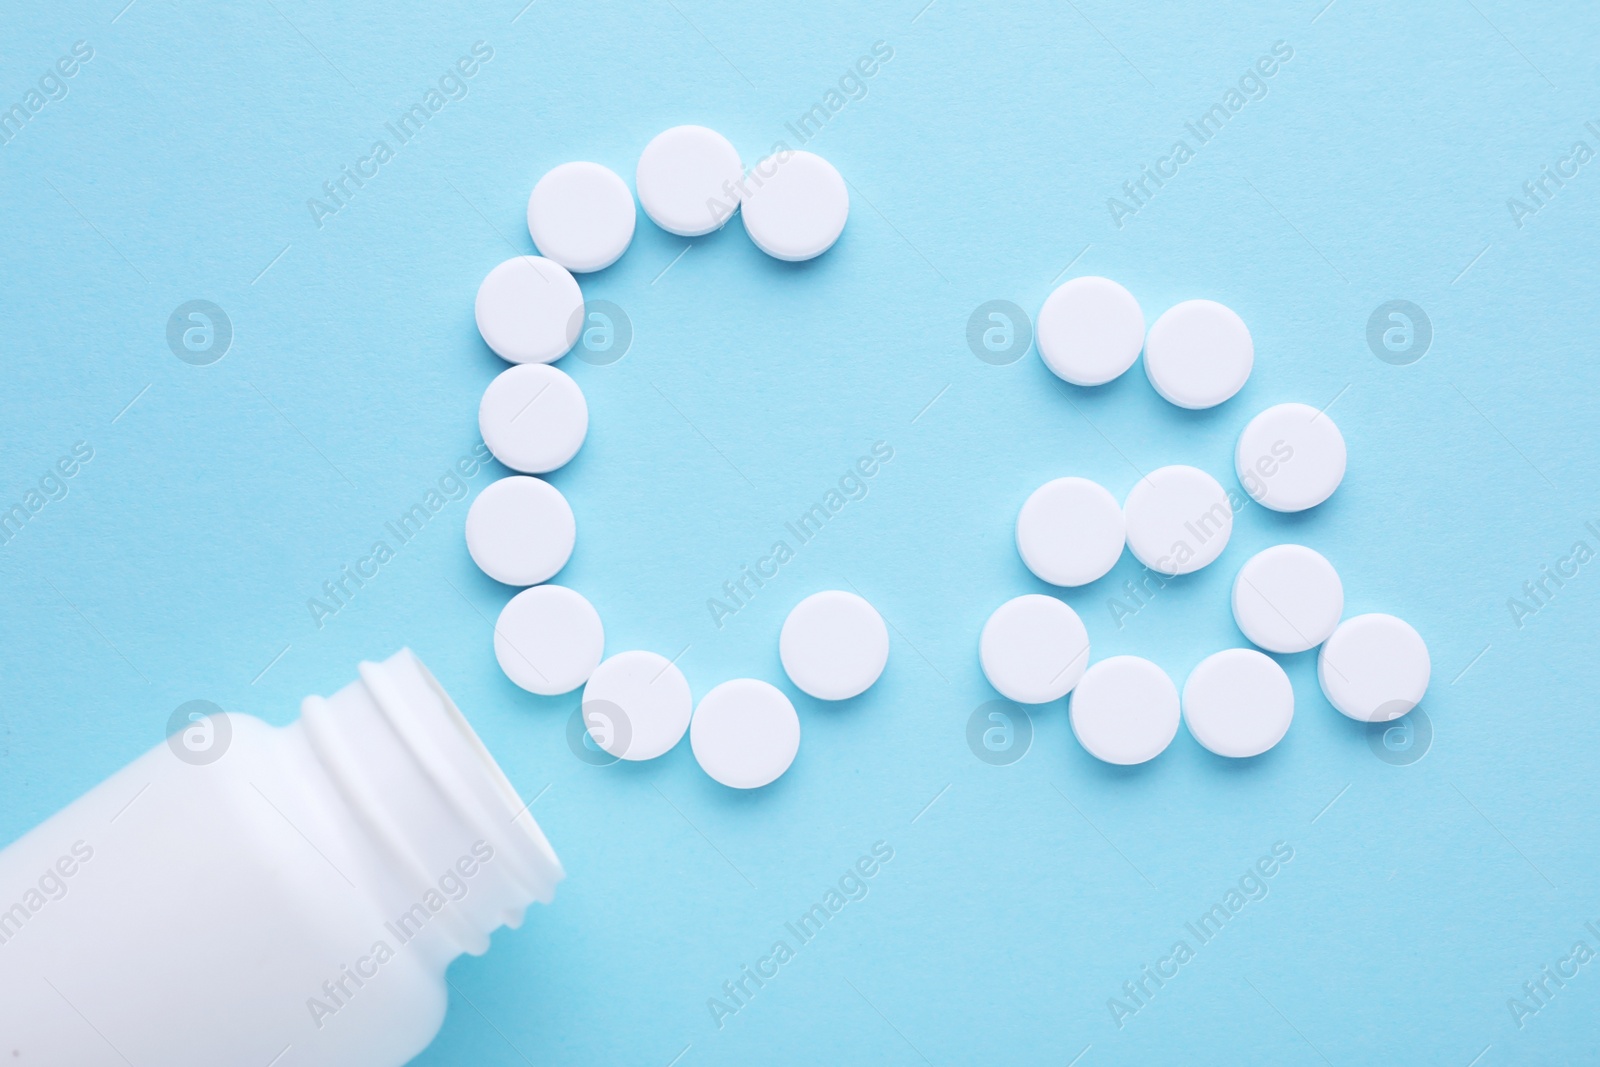 Photo of Open bottle and calcium symbol madewhite pills on light blue background, flat lay